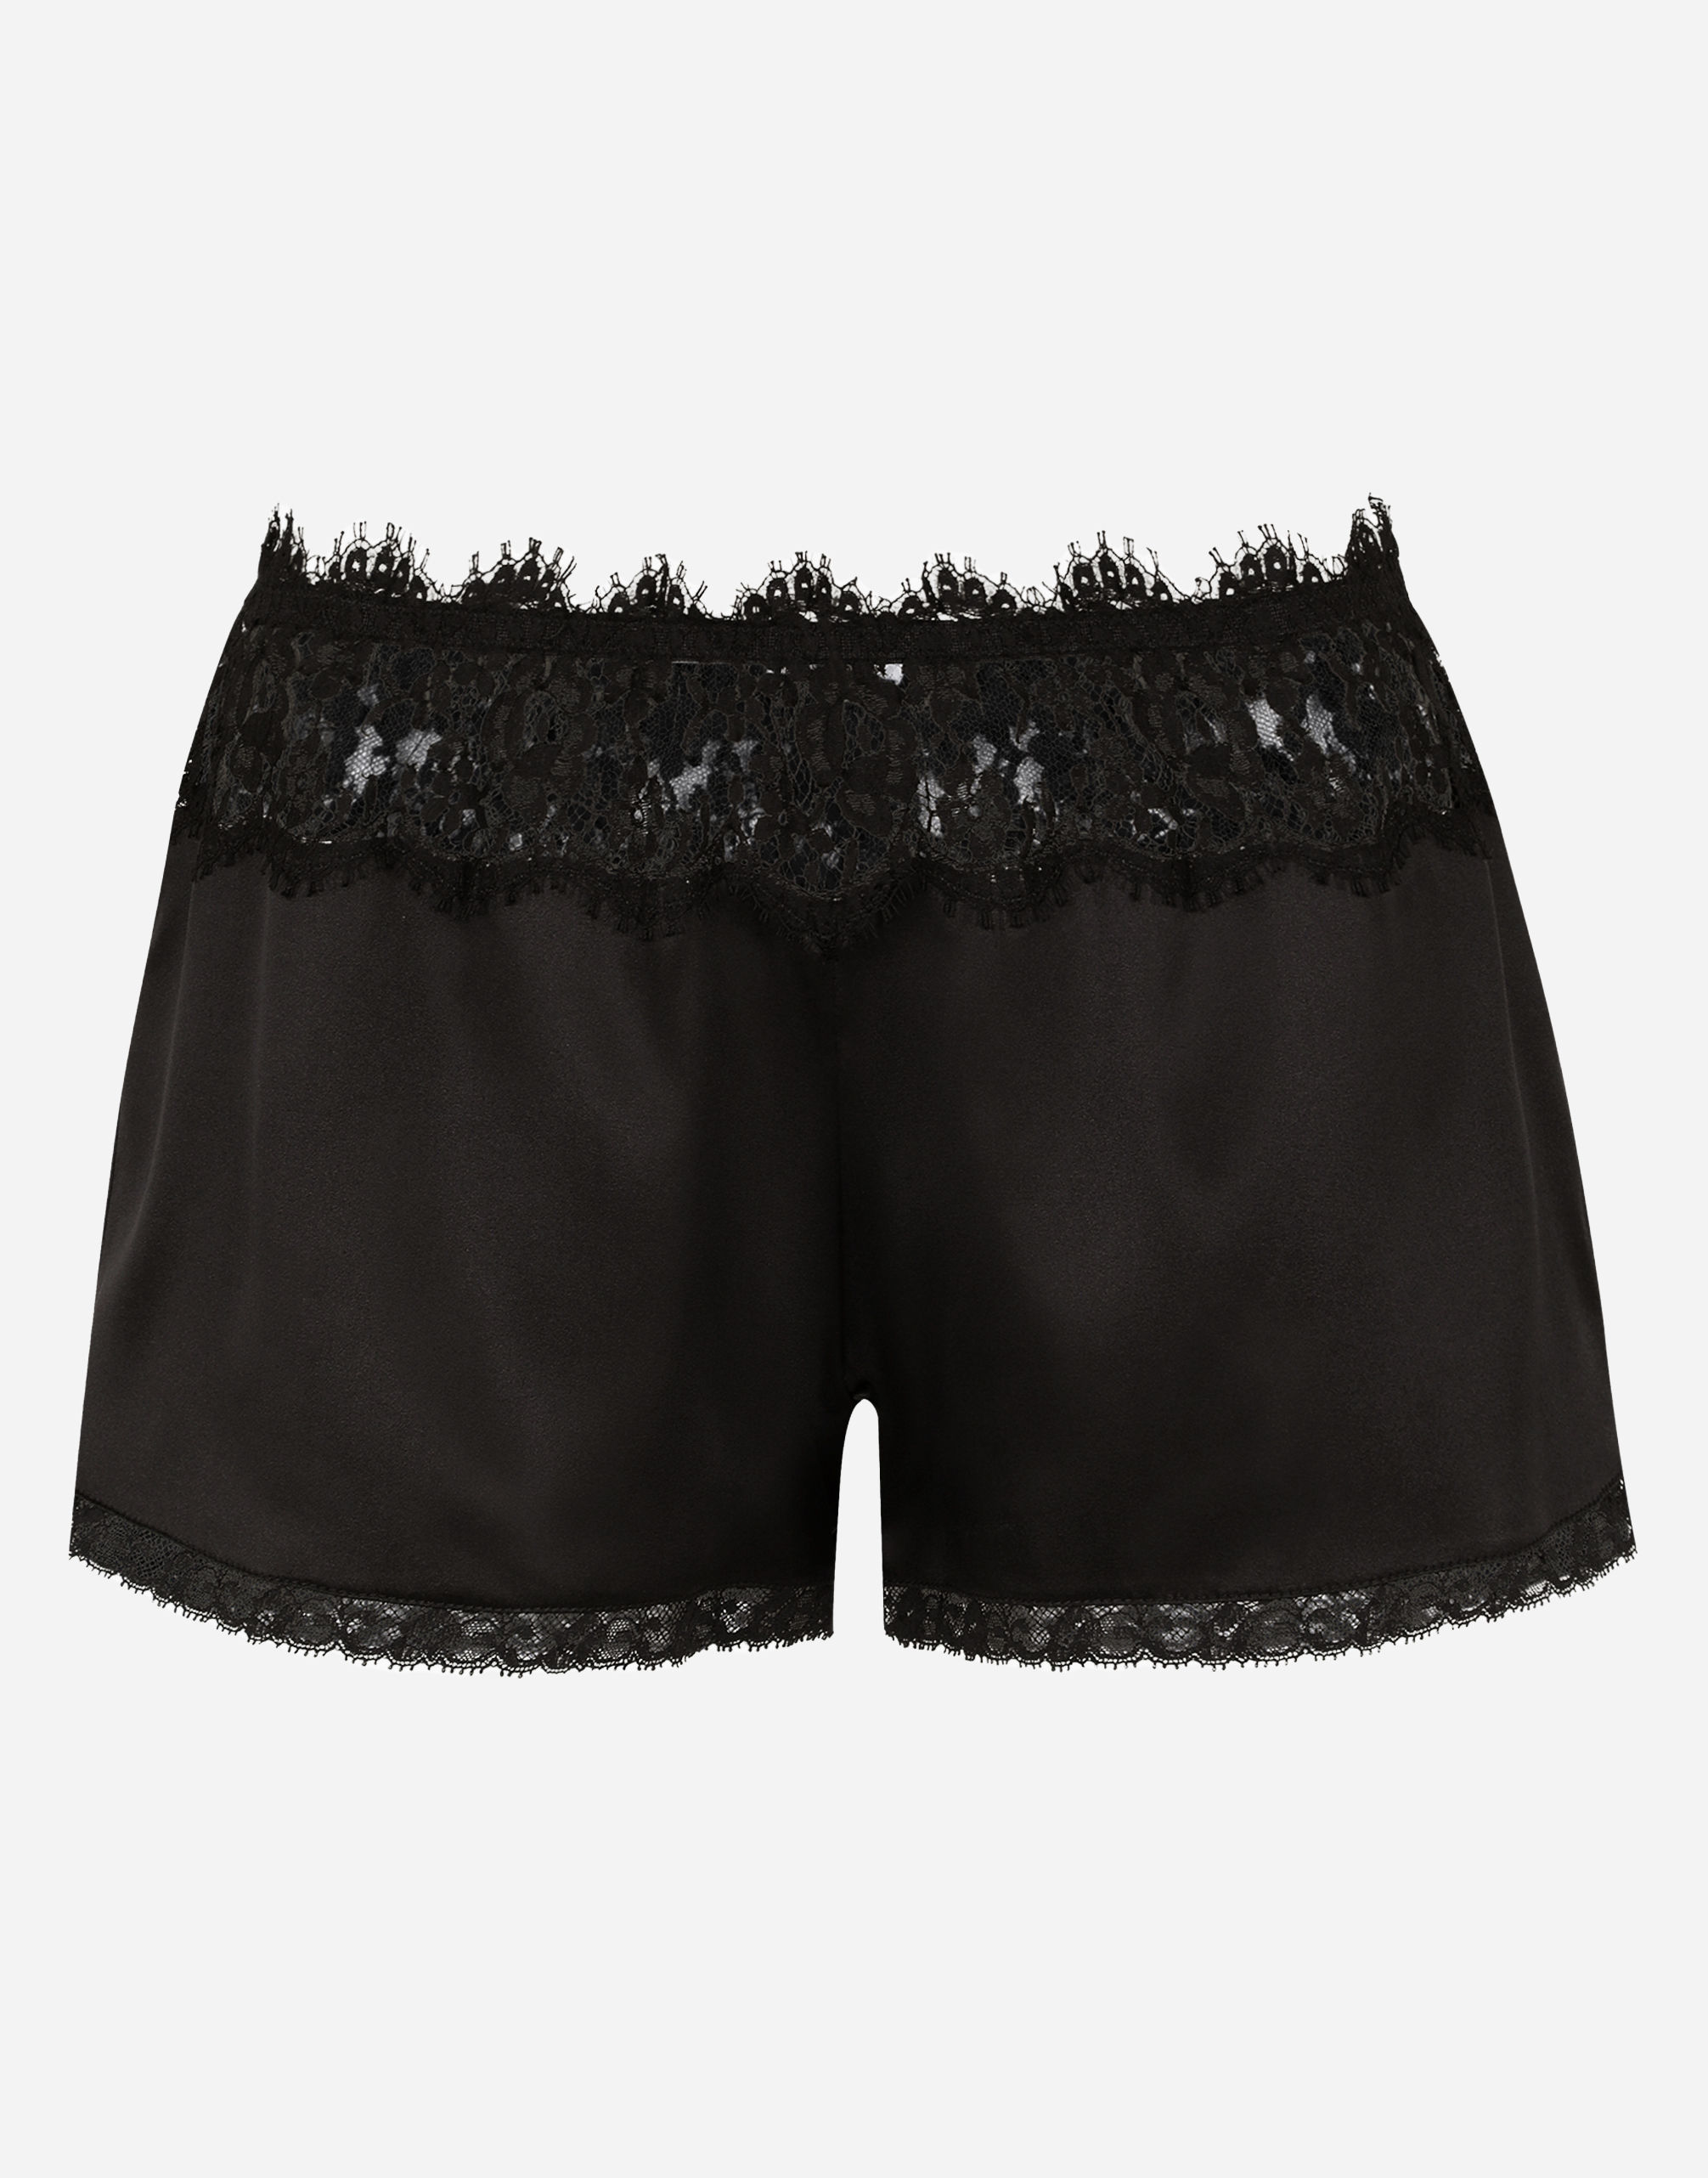 Satin lingerie shorts with lace details in Black